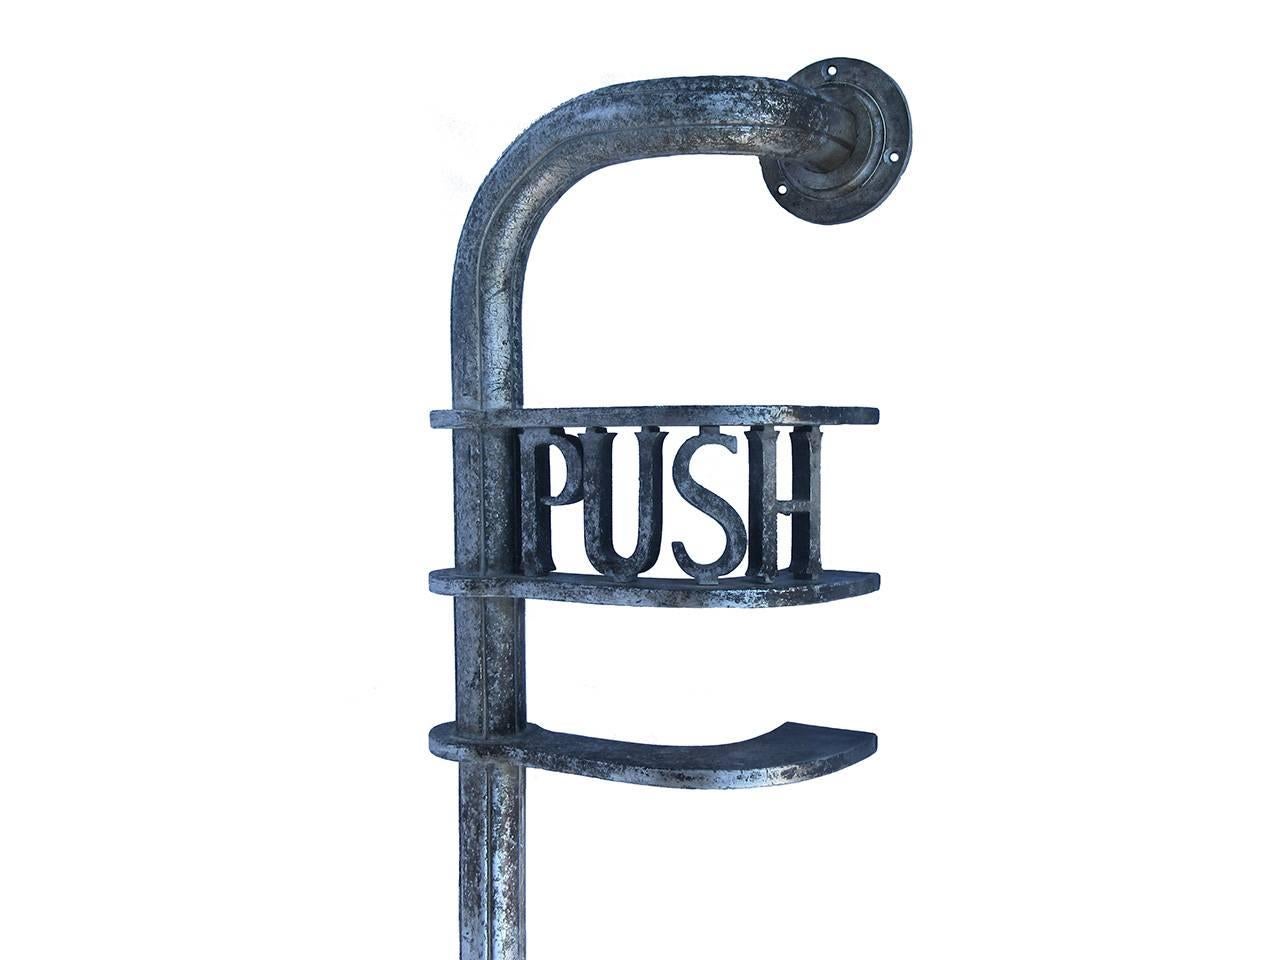 Unusual large-scale aluminum door handle with cut-out lettering 'Push', more than likely used in a commercial setting, as found surface, circa 1930.